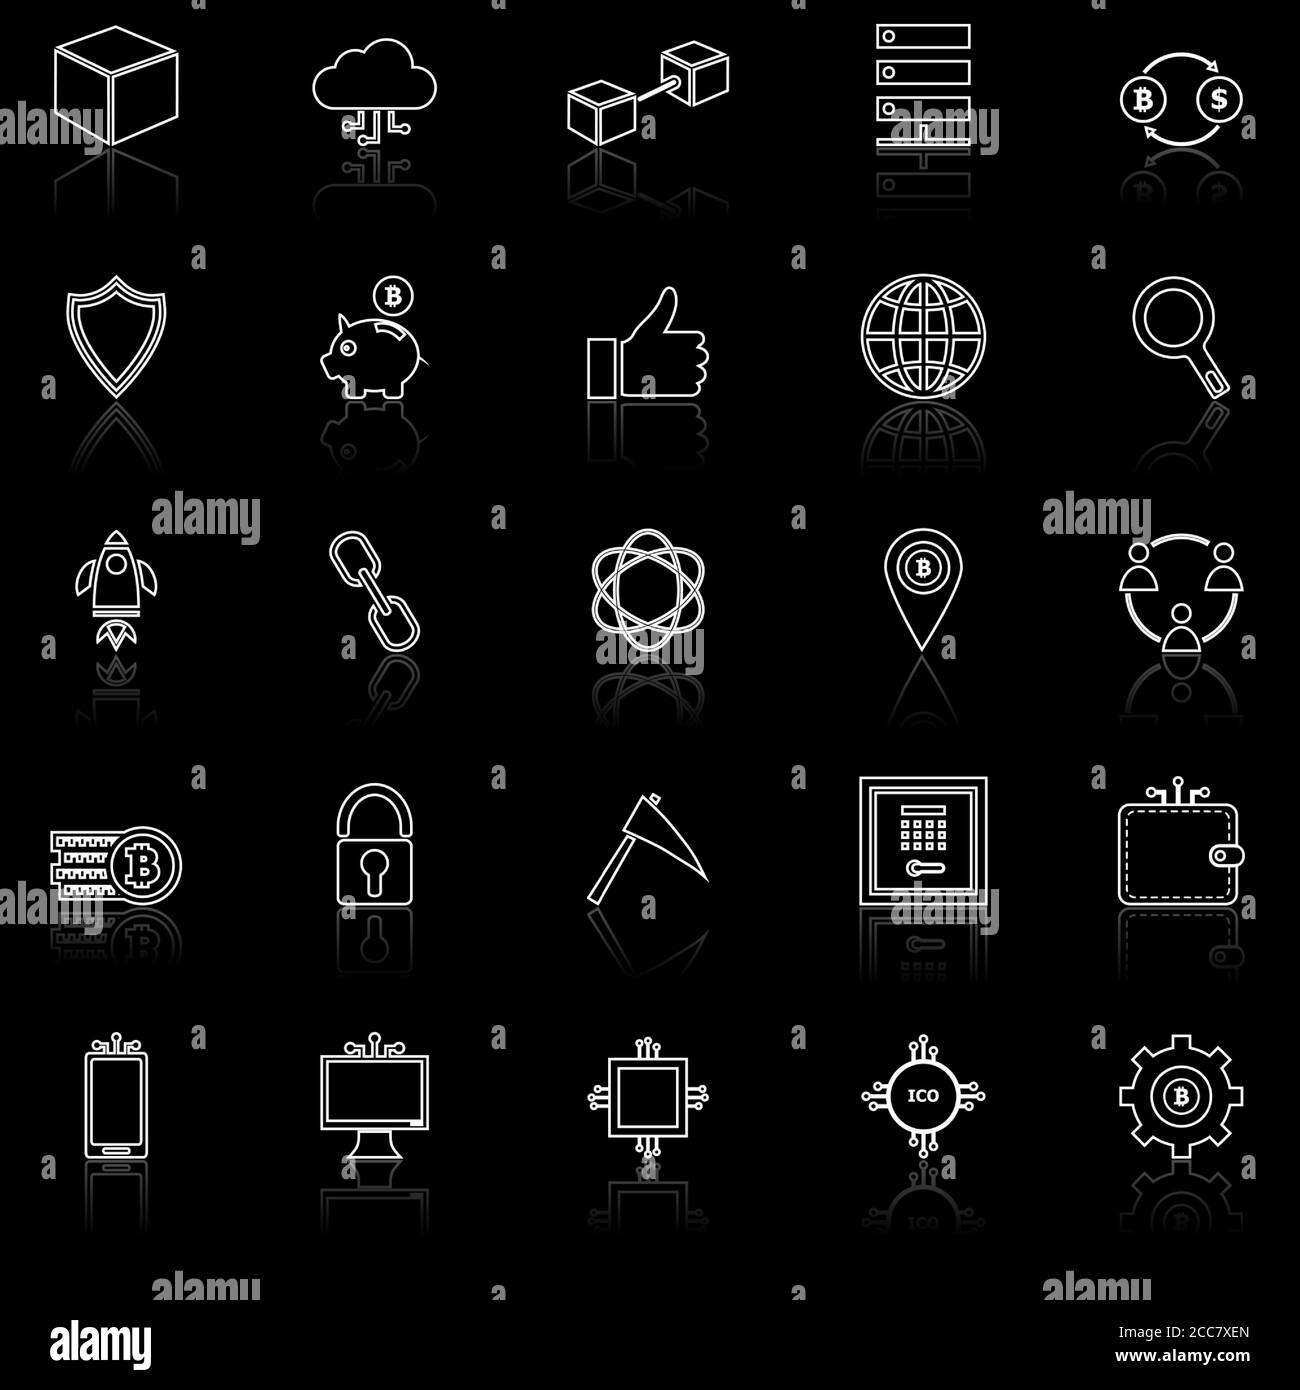 Blockchain line icons with reflect on black background, stock vector Stock Vector